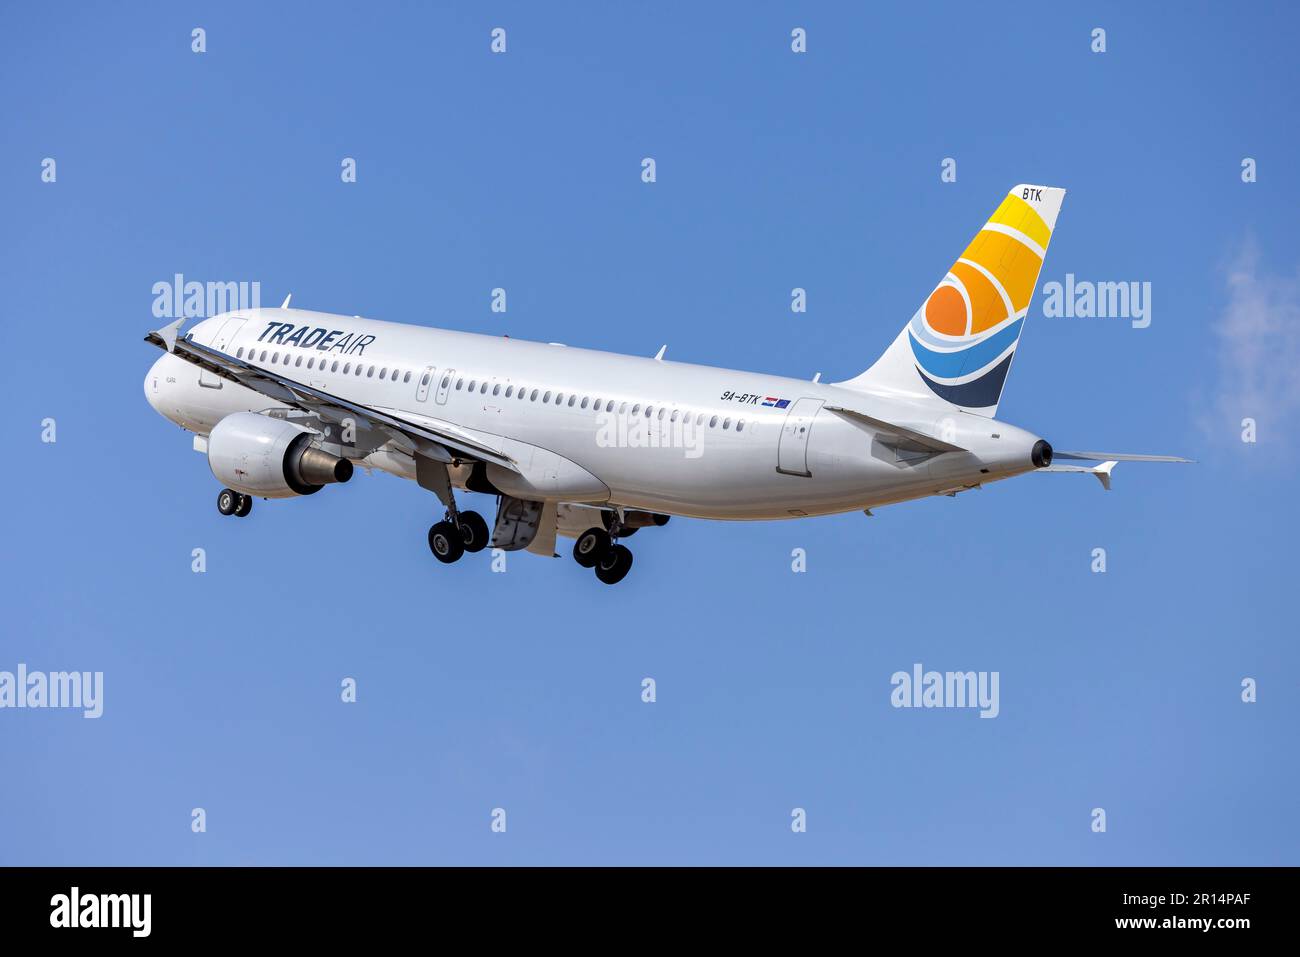 Trade Air Airbus A320-214 (REG: 9A-BTK) departing after some maintenance. Stock Photo